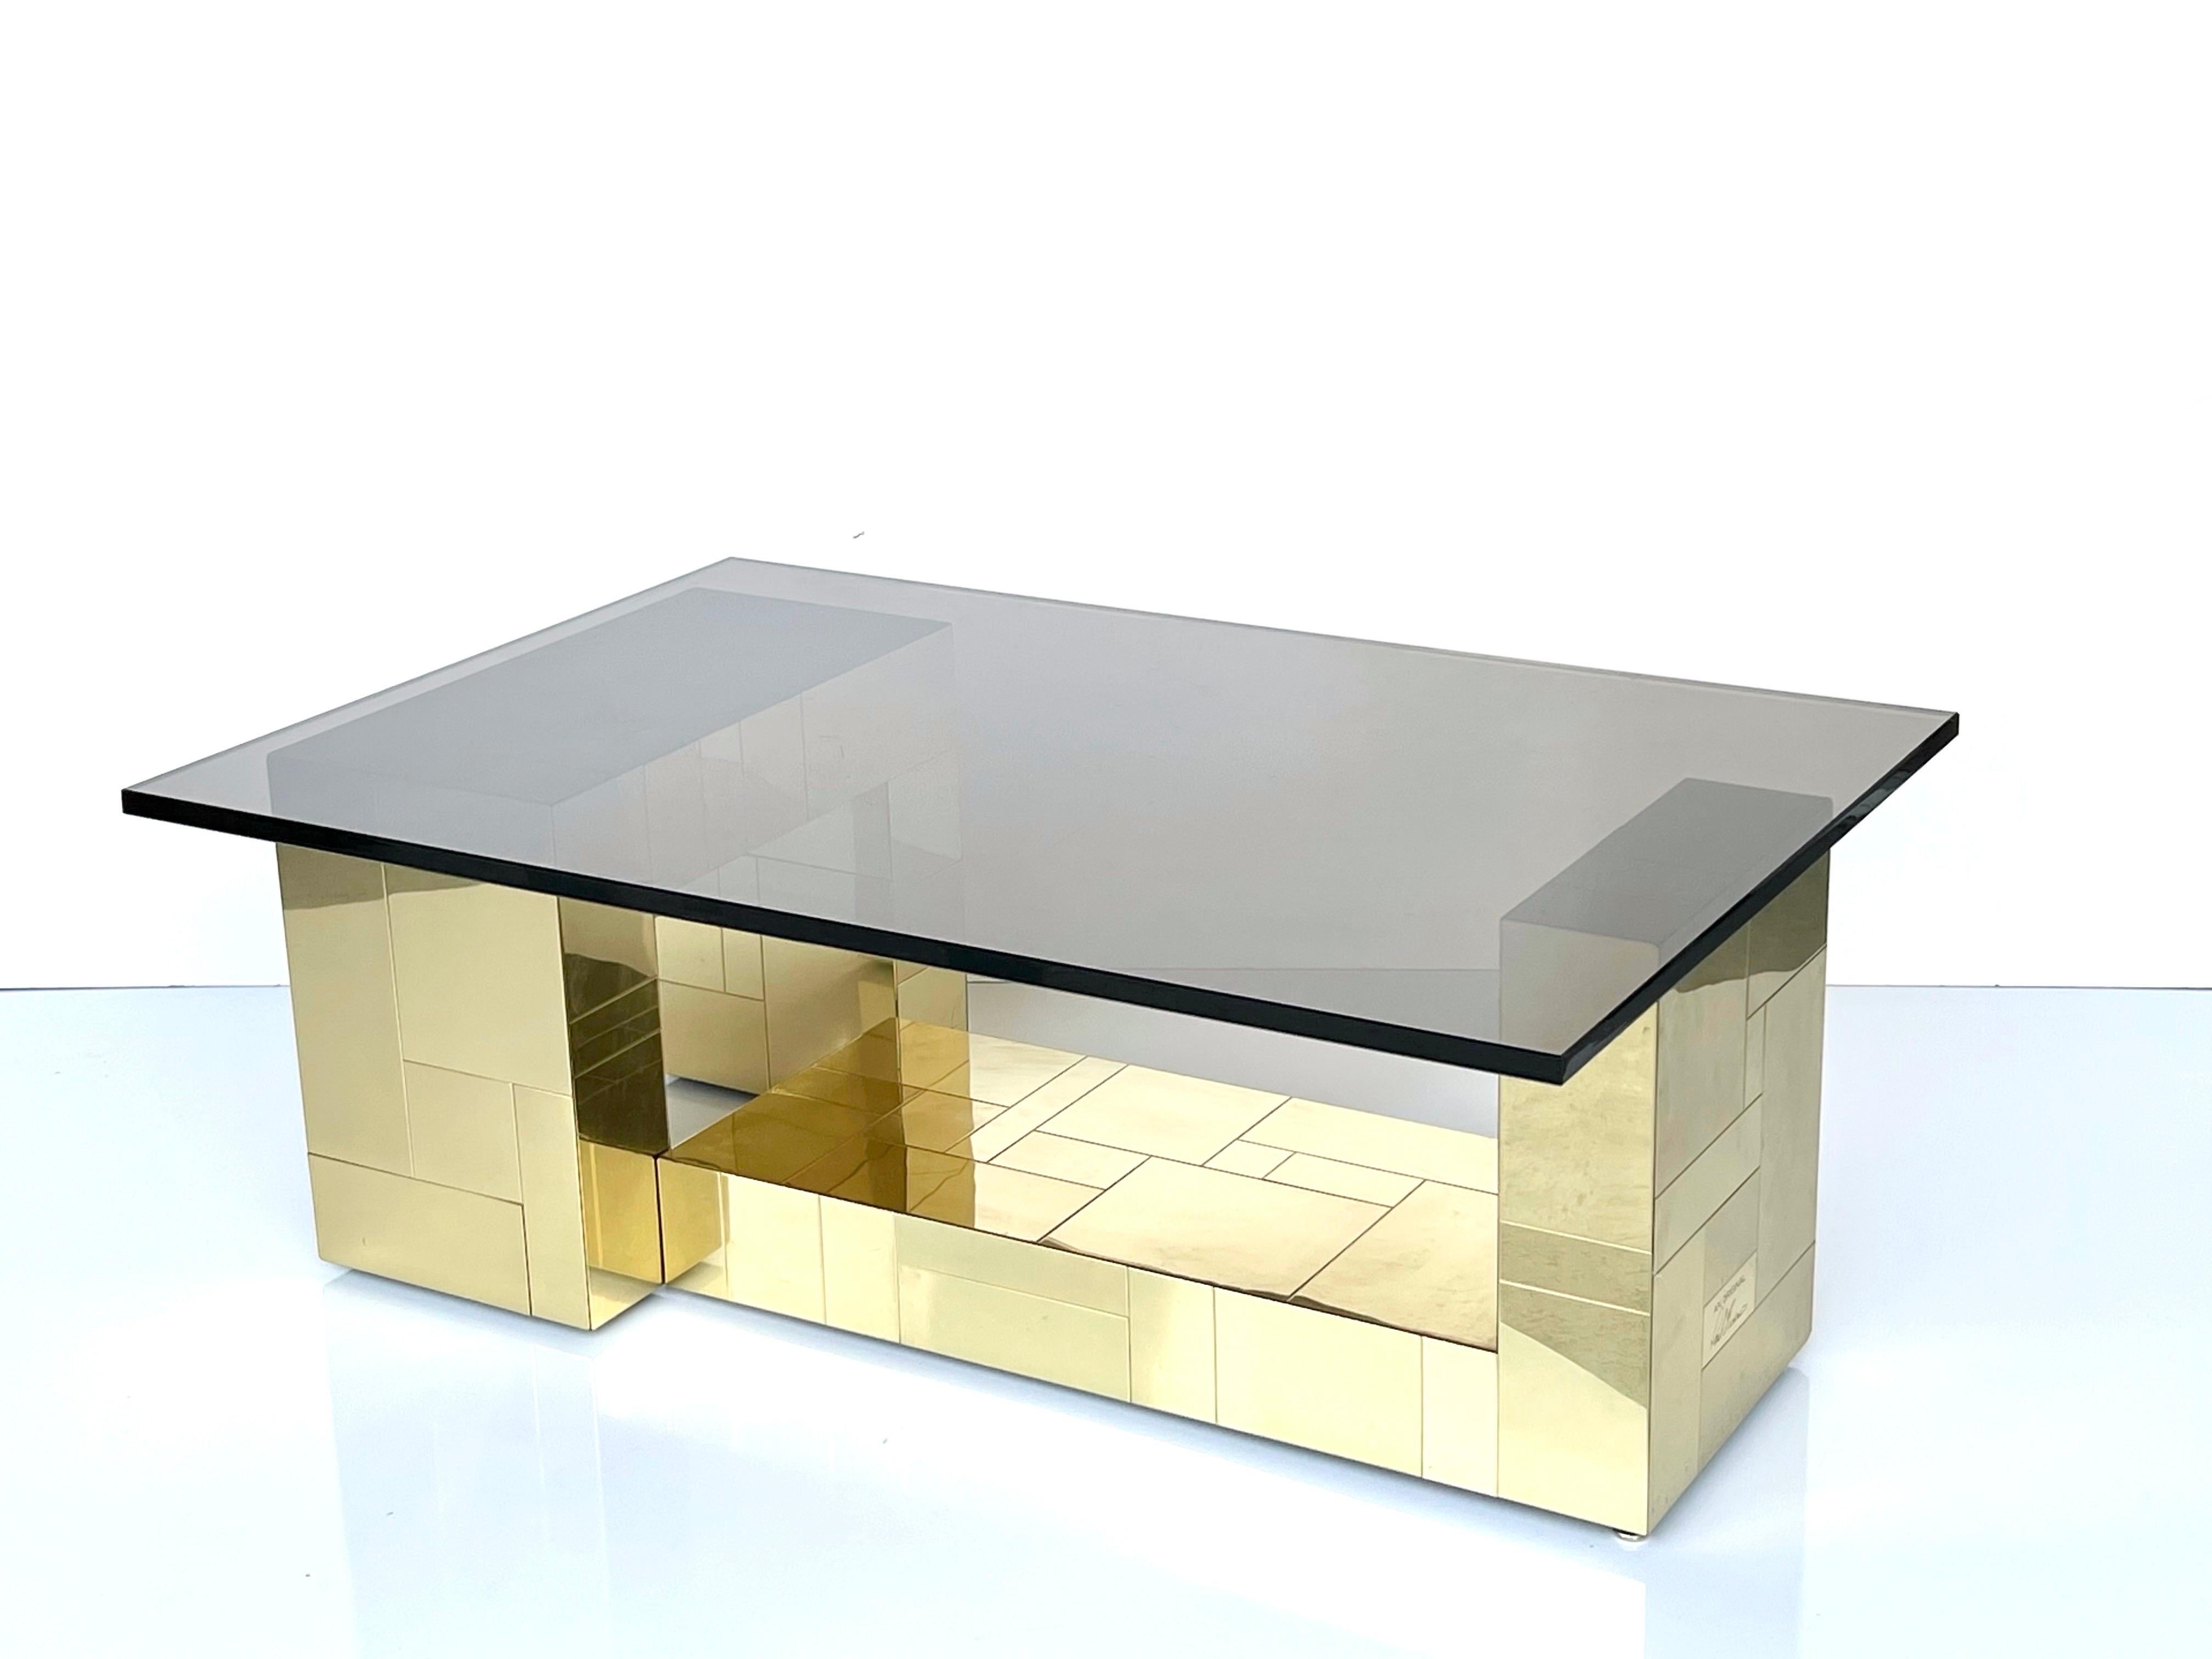 A Paul Evans cityscape coffee table done in brass. The base of the table consists of 2 independent elements. Offered with a top in bronze color glass. The bases can also accommodate a larger top and different configurations.